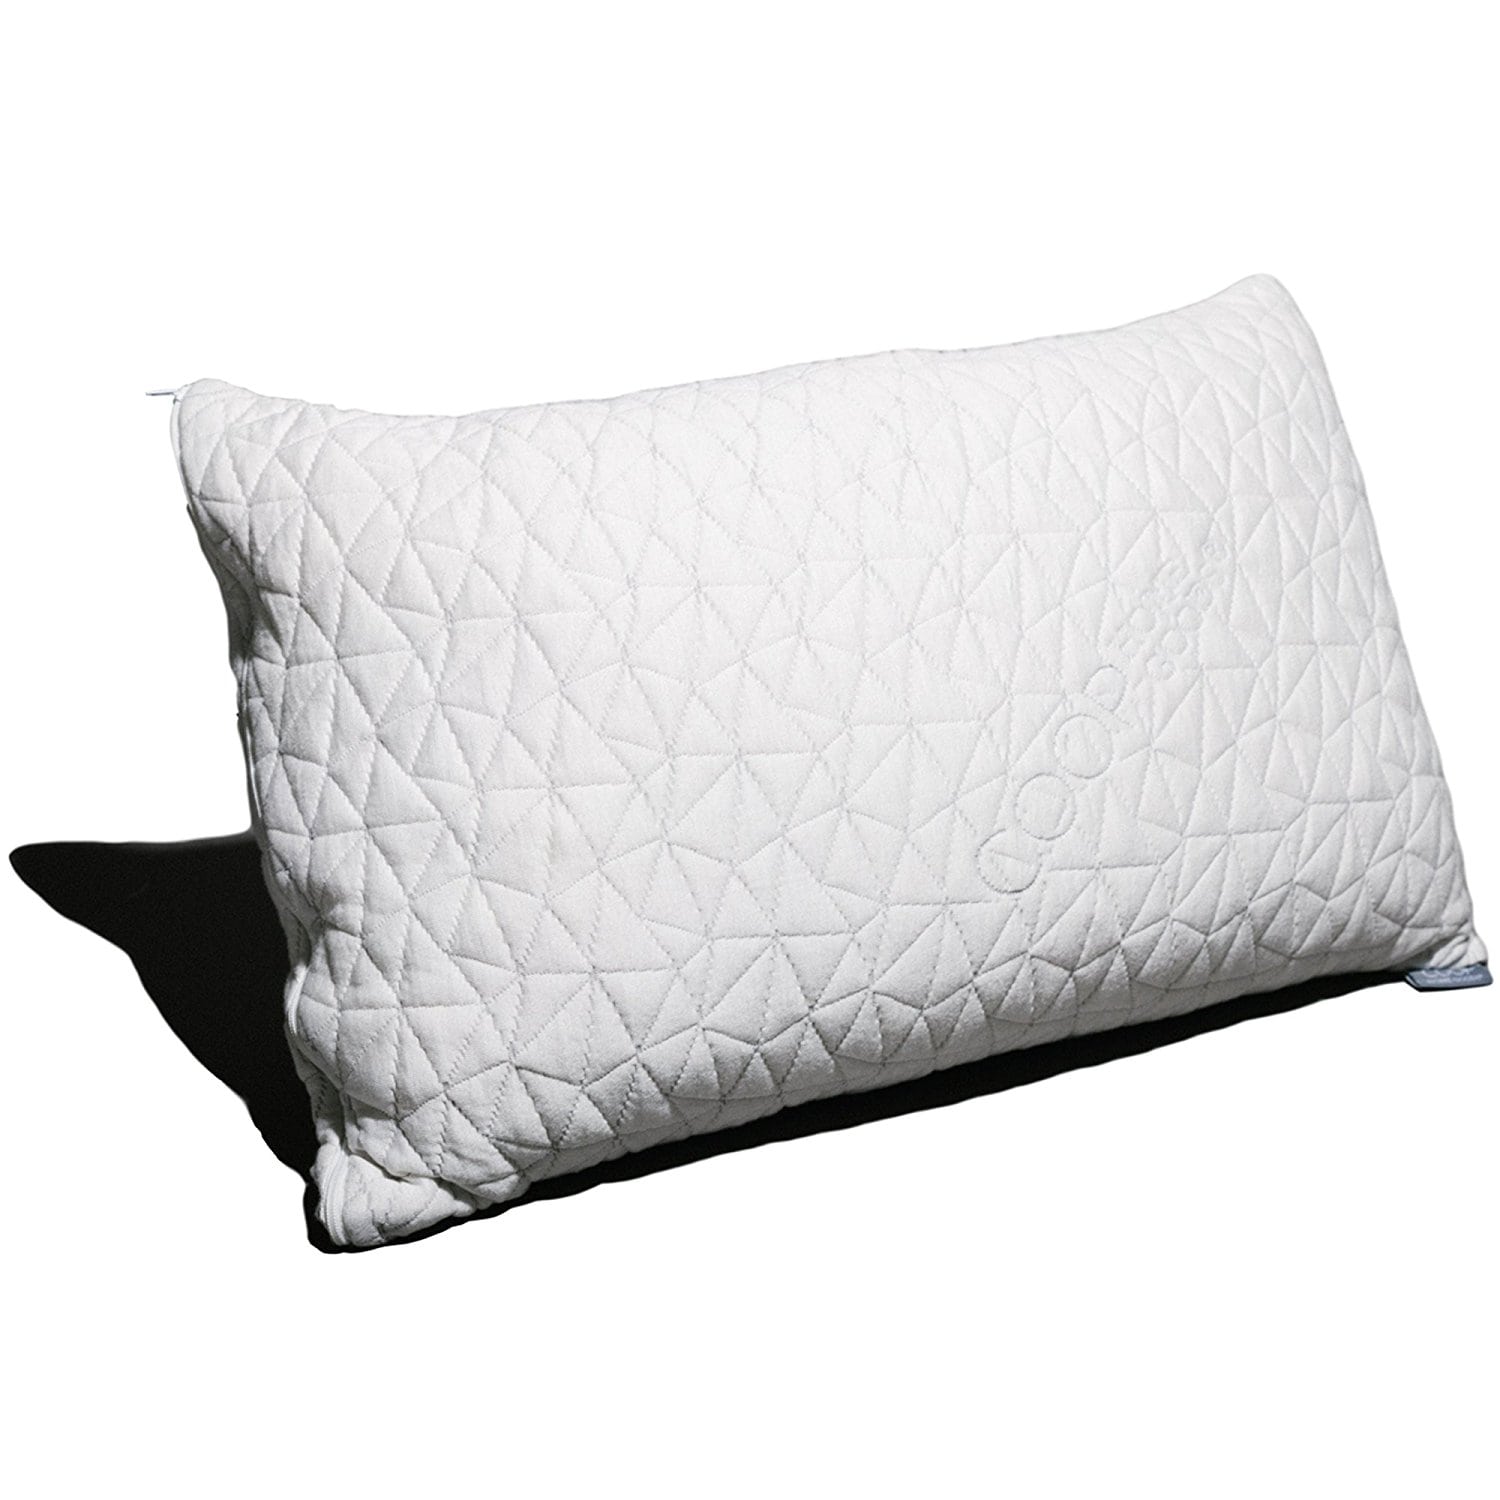 You are currently viewing Coop Home Goods – Premium Adjustable Loft – Shredded Hypoallergenic Certipur Memory Foam Pillow with Washable Removable Cover